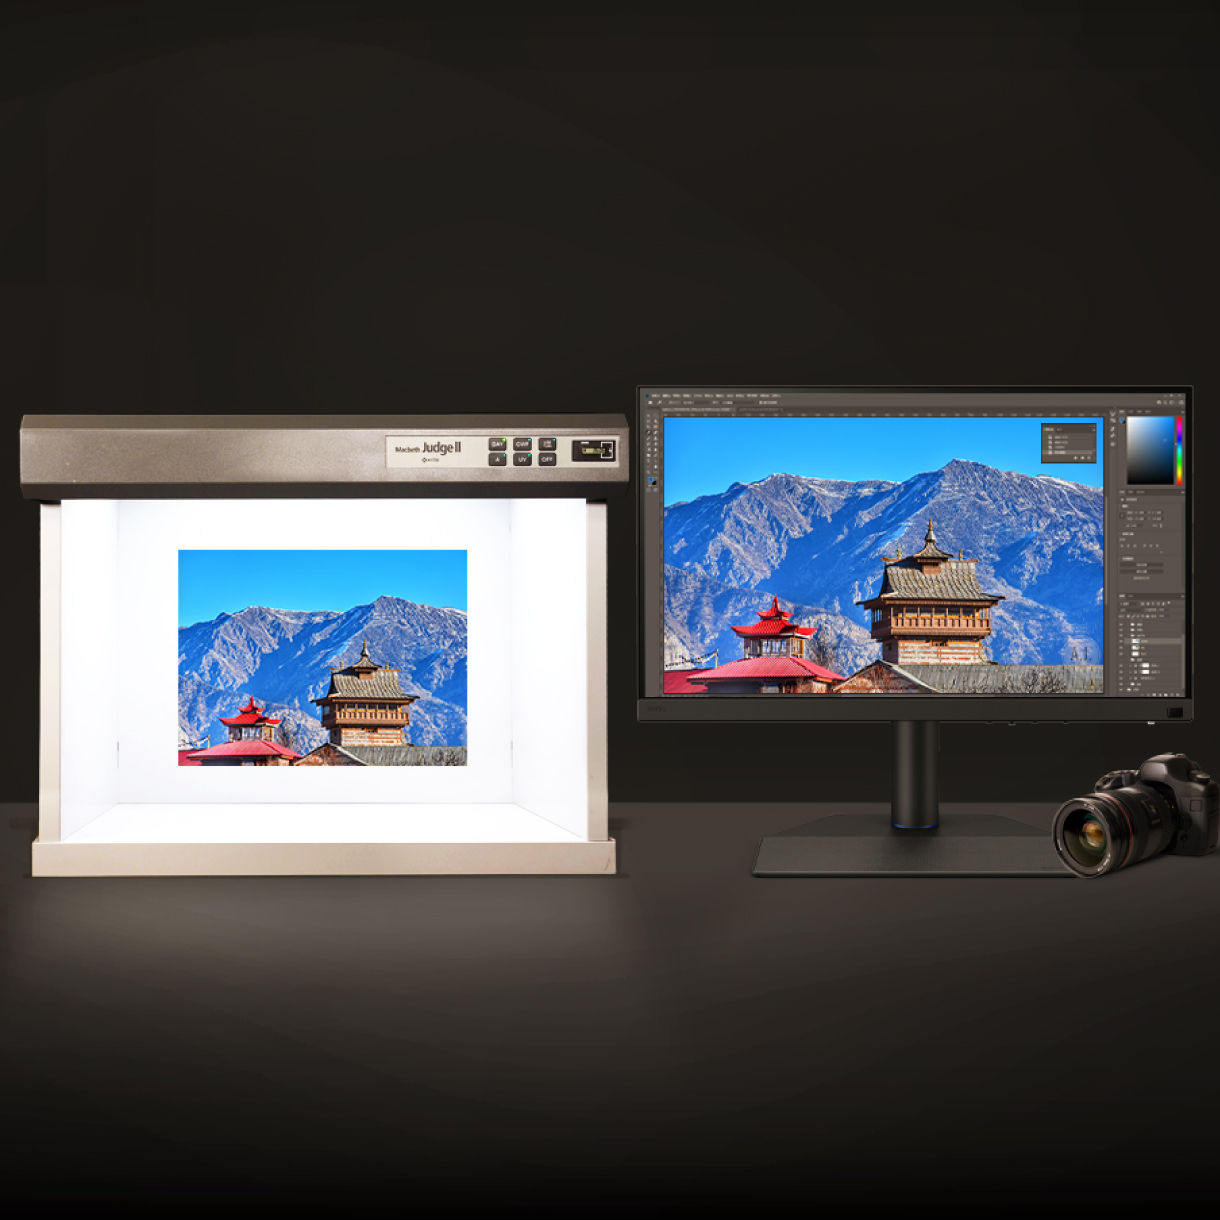 BenQ SW272U offers the finest creative experiences with color consistency to simulate paper texture on-screen, and Paper Color Sync for accurate printed output, BenQ achieved unparalleled color performance beyond the industry standard.